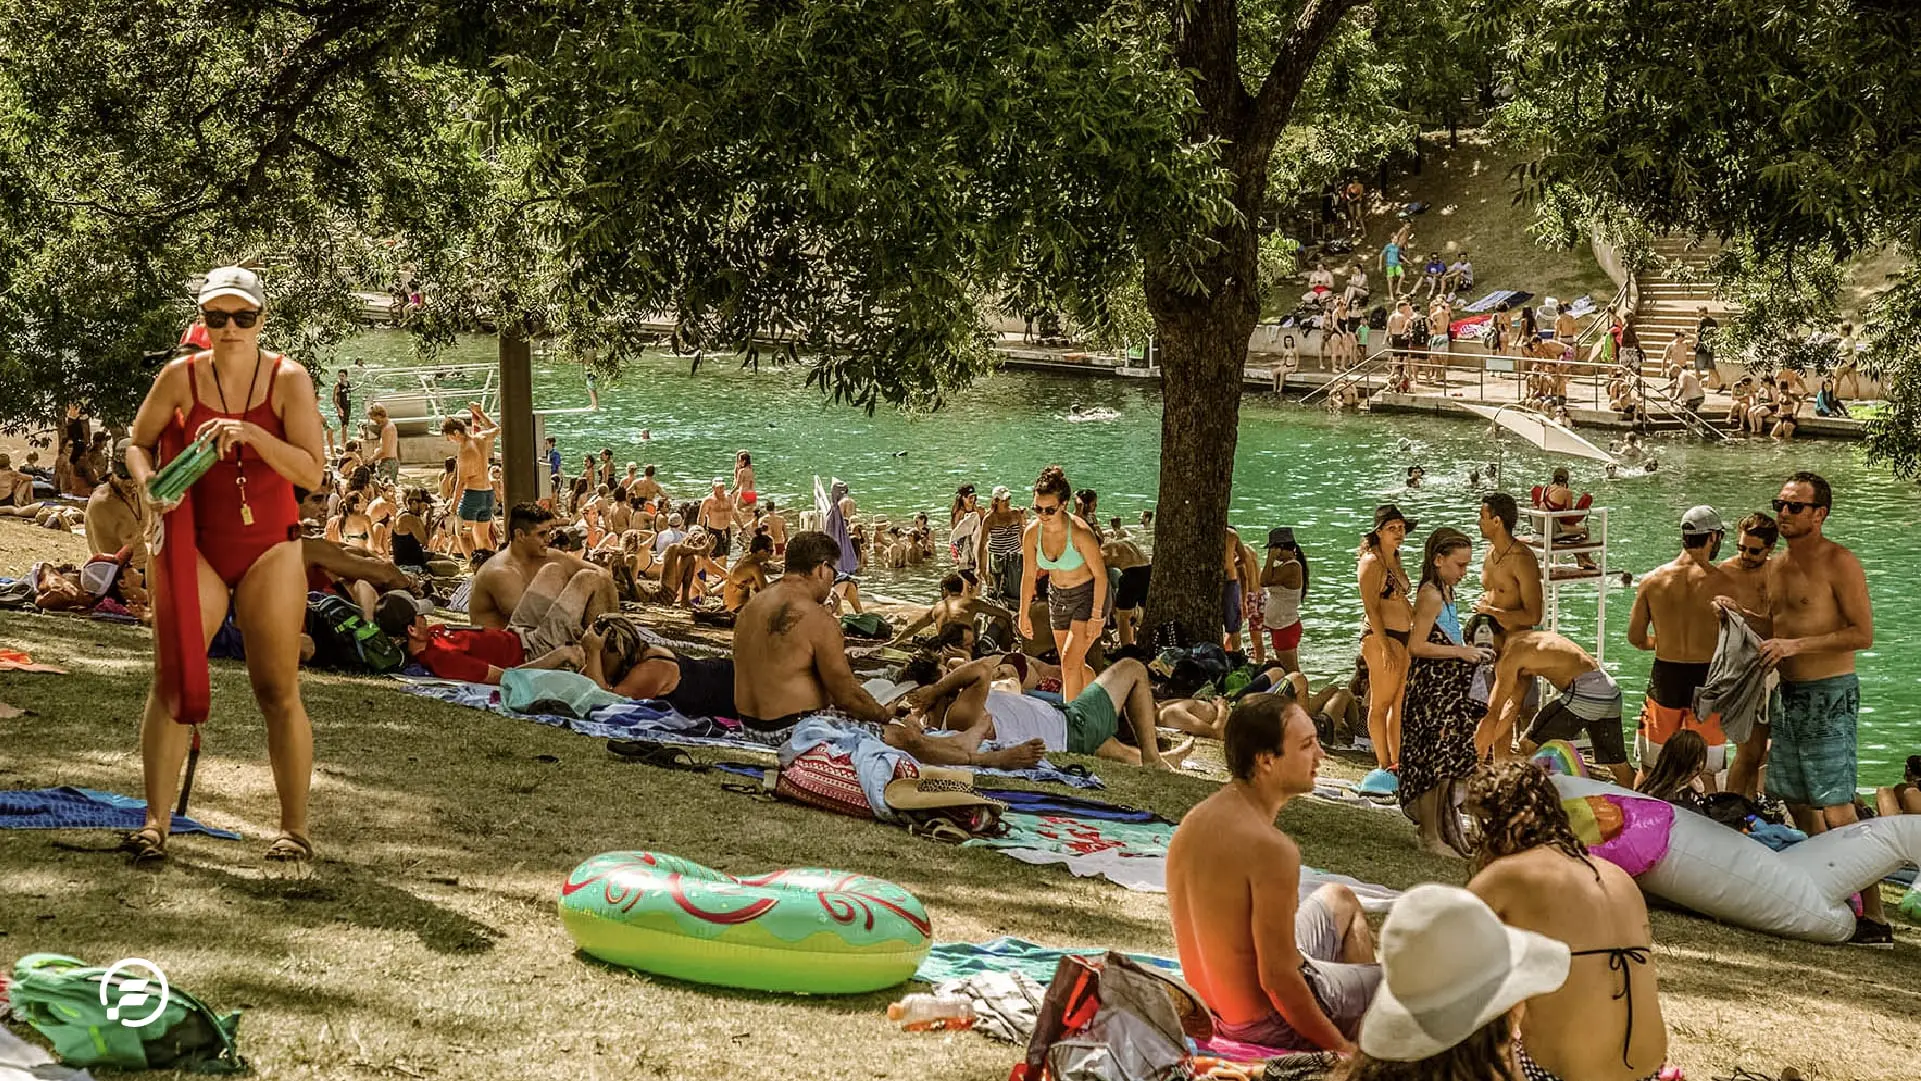 A crowd of people enjoying the sun and water at Barton Springs Pool.